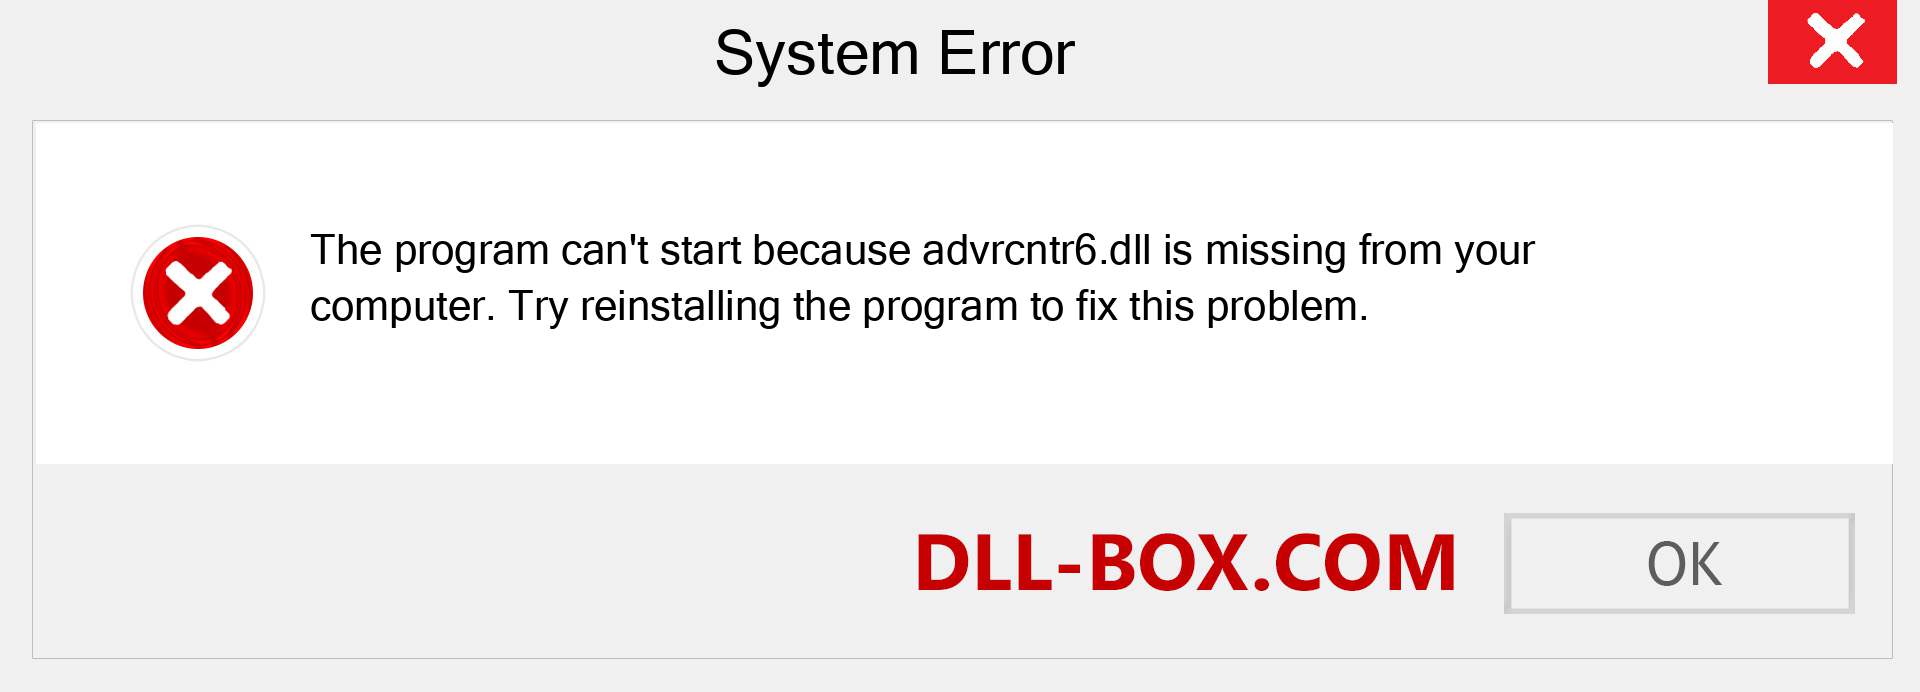  advrcntr6.dll file is missing?. Download for Windows 7, 8, 10 - Fix  advrcntr6 dll Missing Error on Windows, photos, images